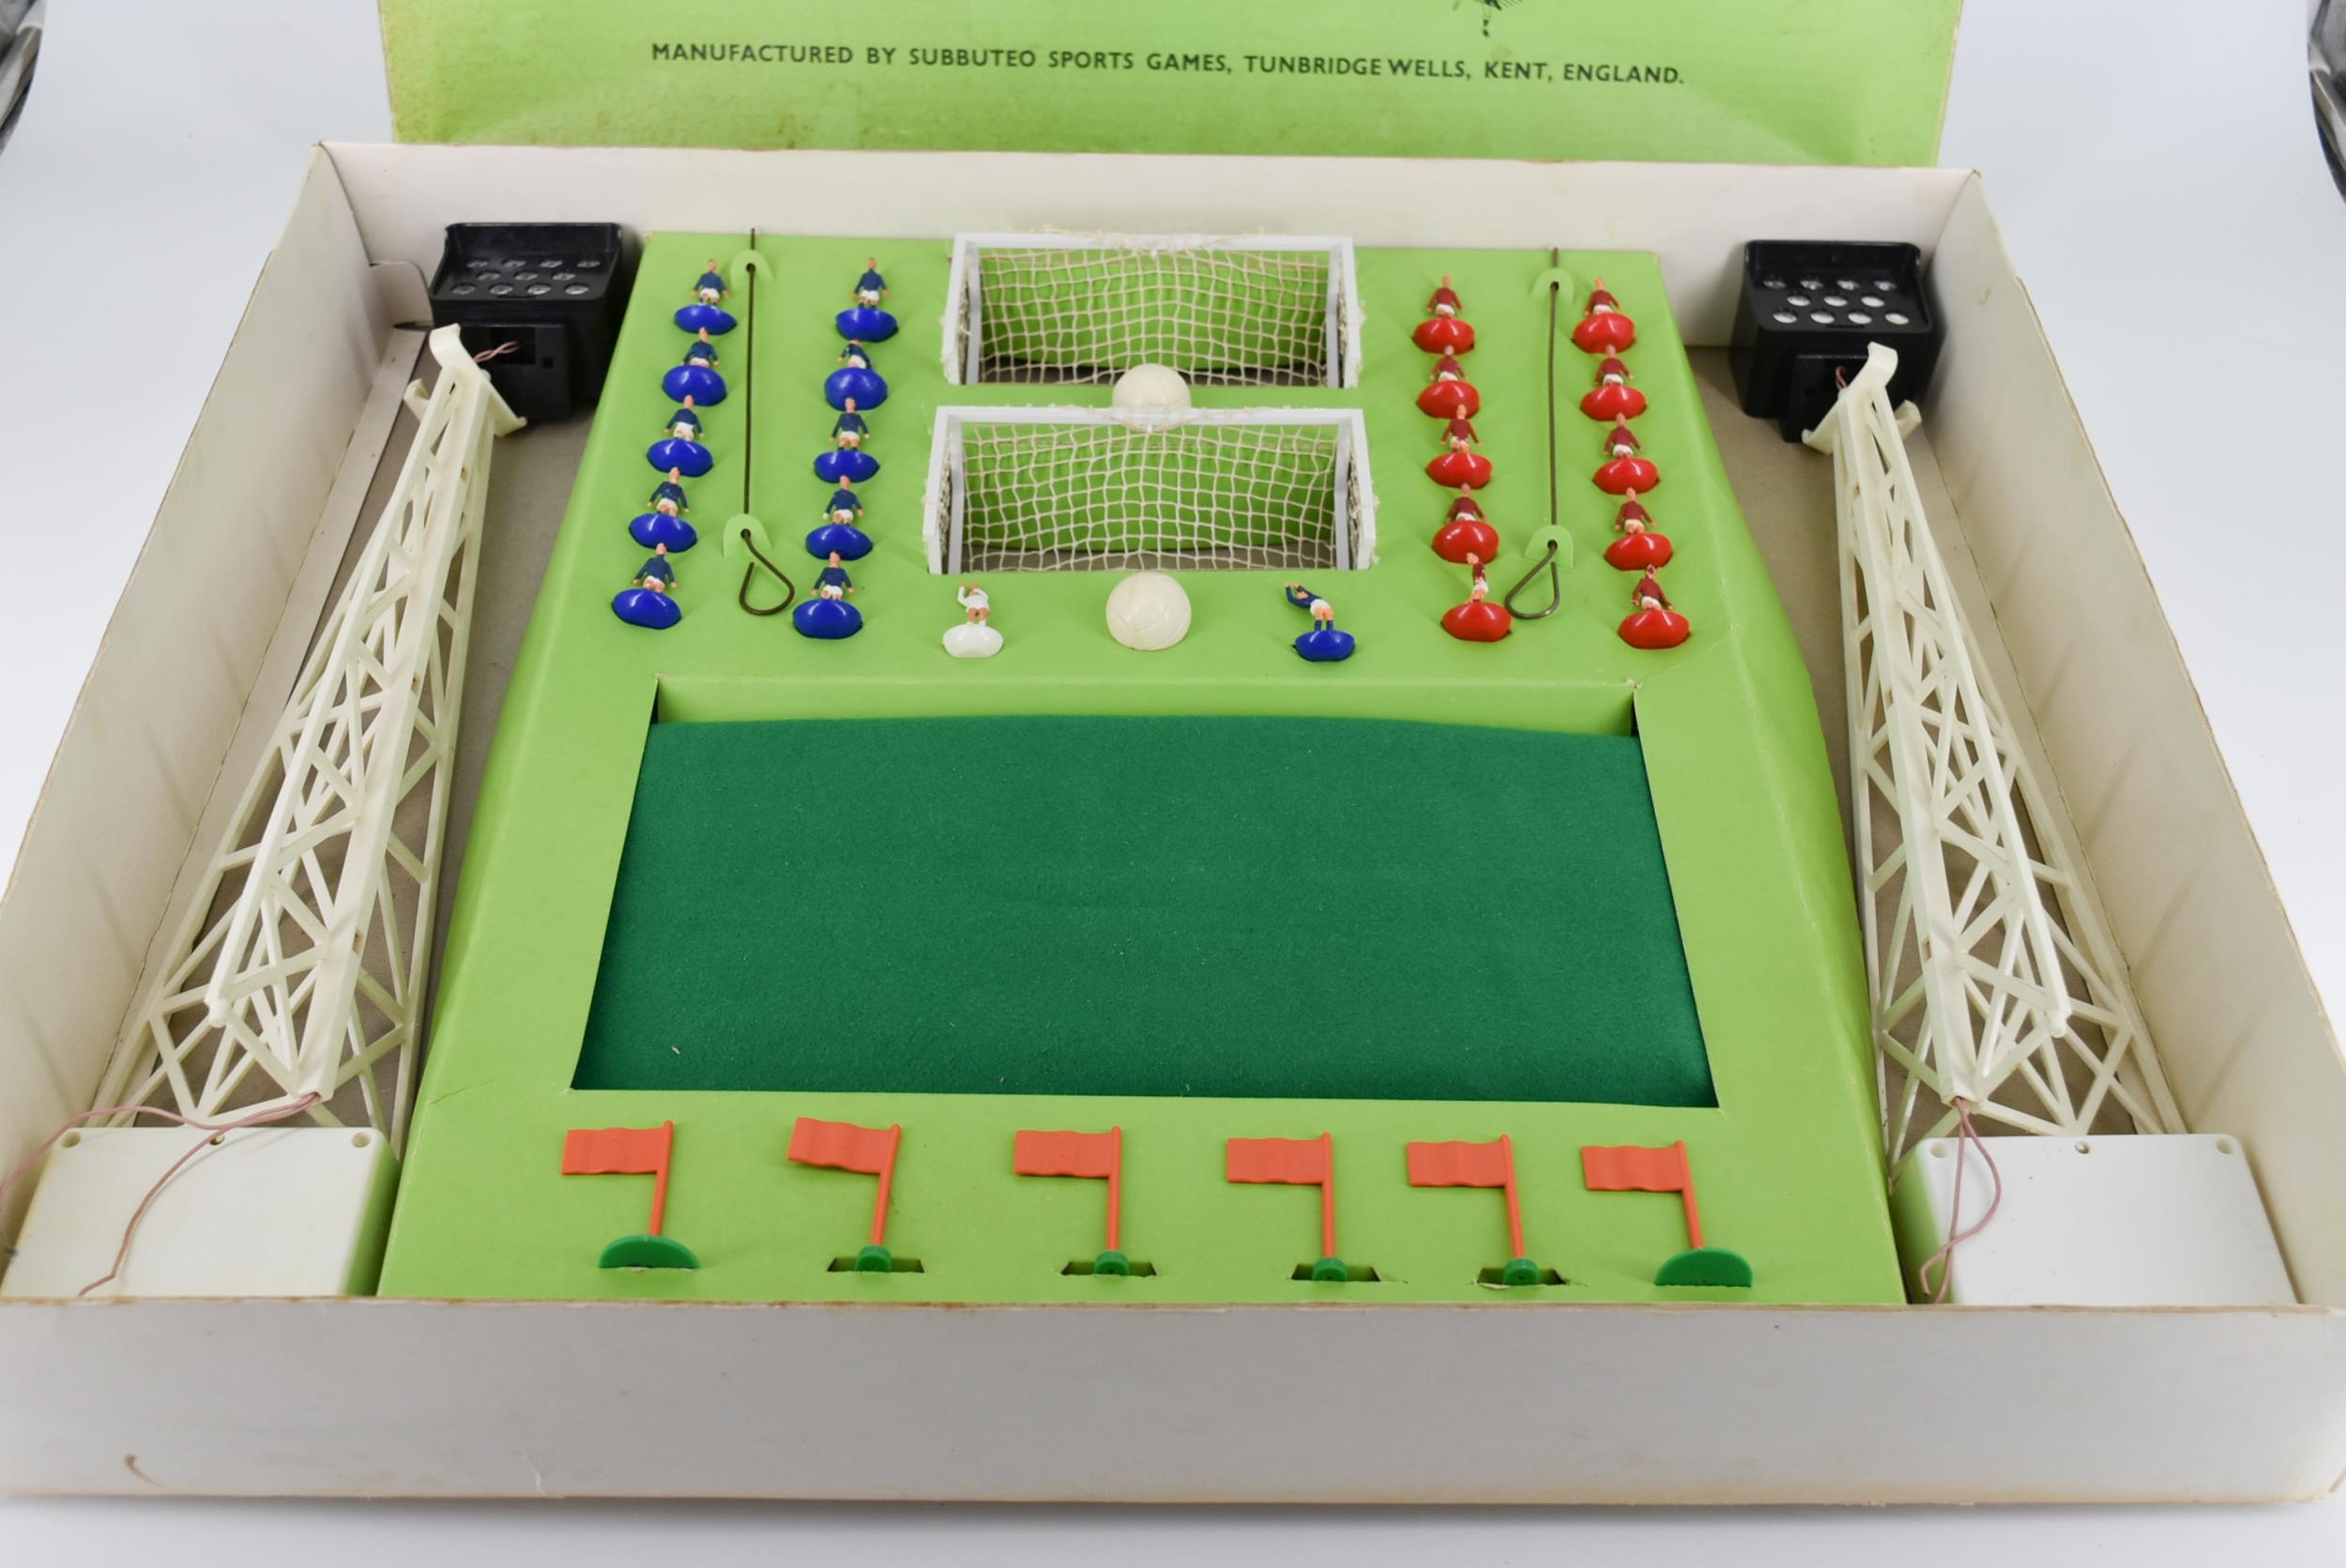 A vintage Subbuteo 'Floodlighting' edition set with box and acrylic pieces. (complete) - Image 2 of 4